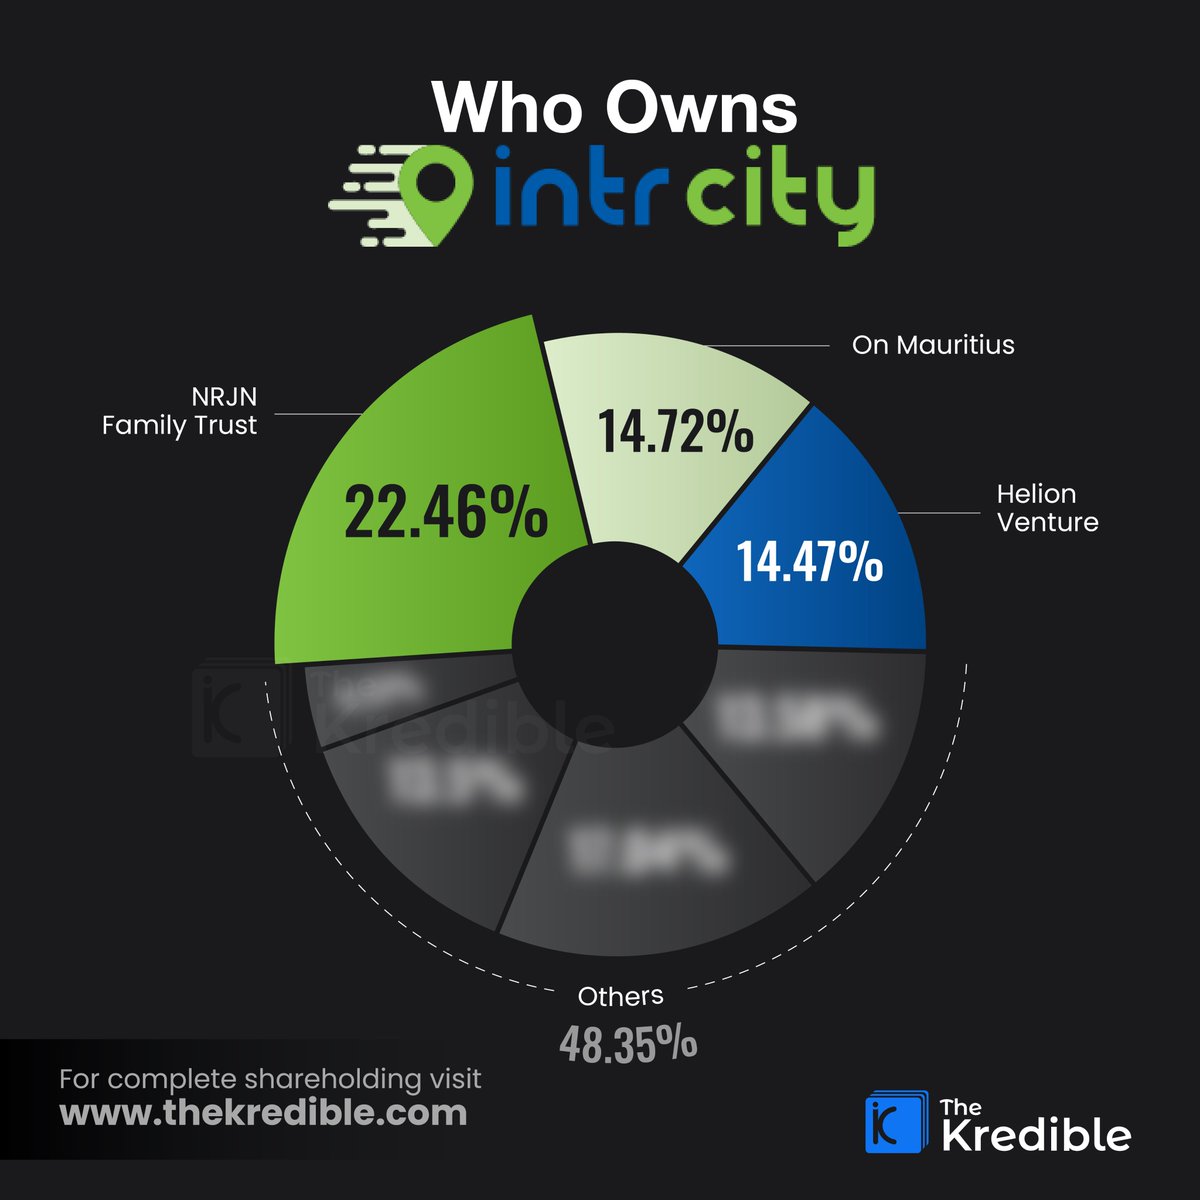 IntrCity, parent company of SmartBus & RailYatri, recently raised Rs 37 Cr led by Mirabilis Investment Trust.

The company’s shareholding pattern: 

* NRJN Family Trust: 22.46%
* On Mauritius: 14.72%
* Helicon Ventures: 14.47%

Follow TheKredible for more insights.